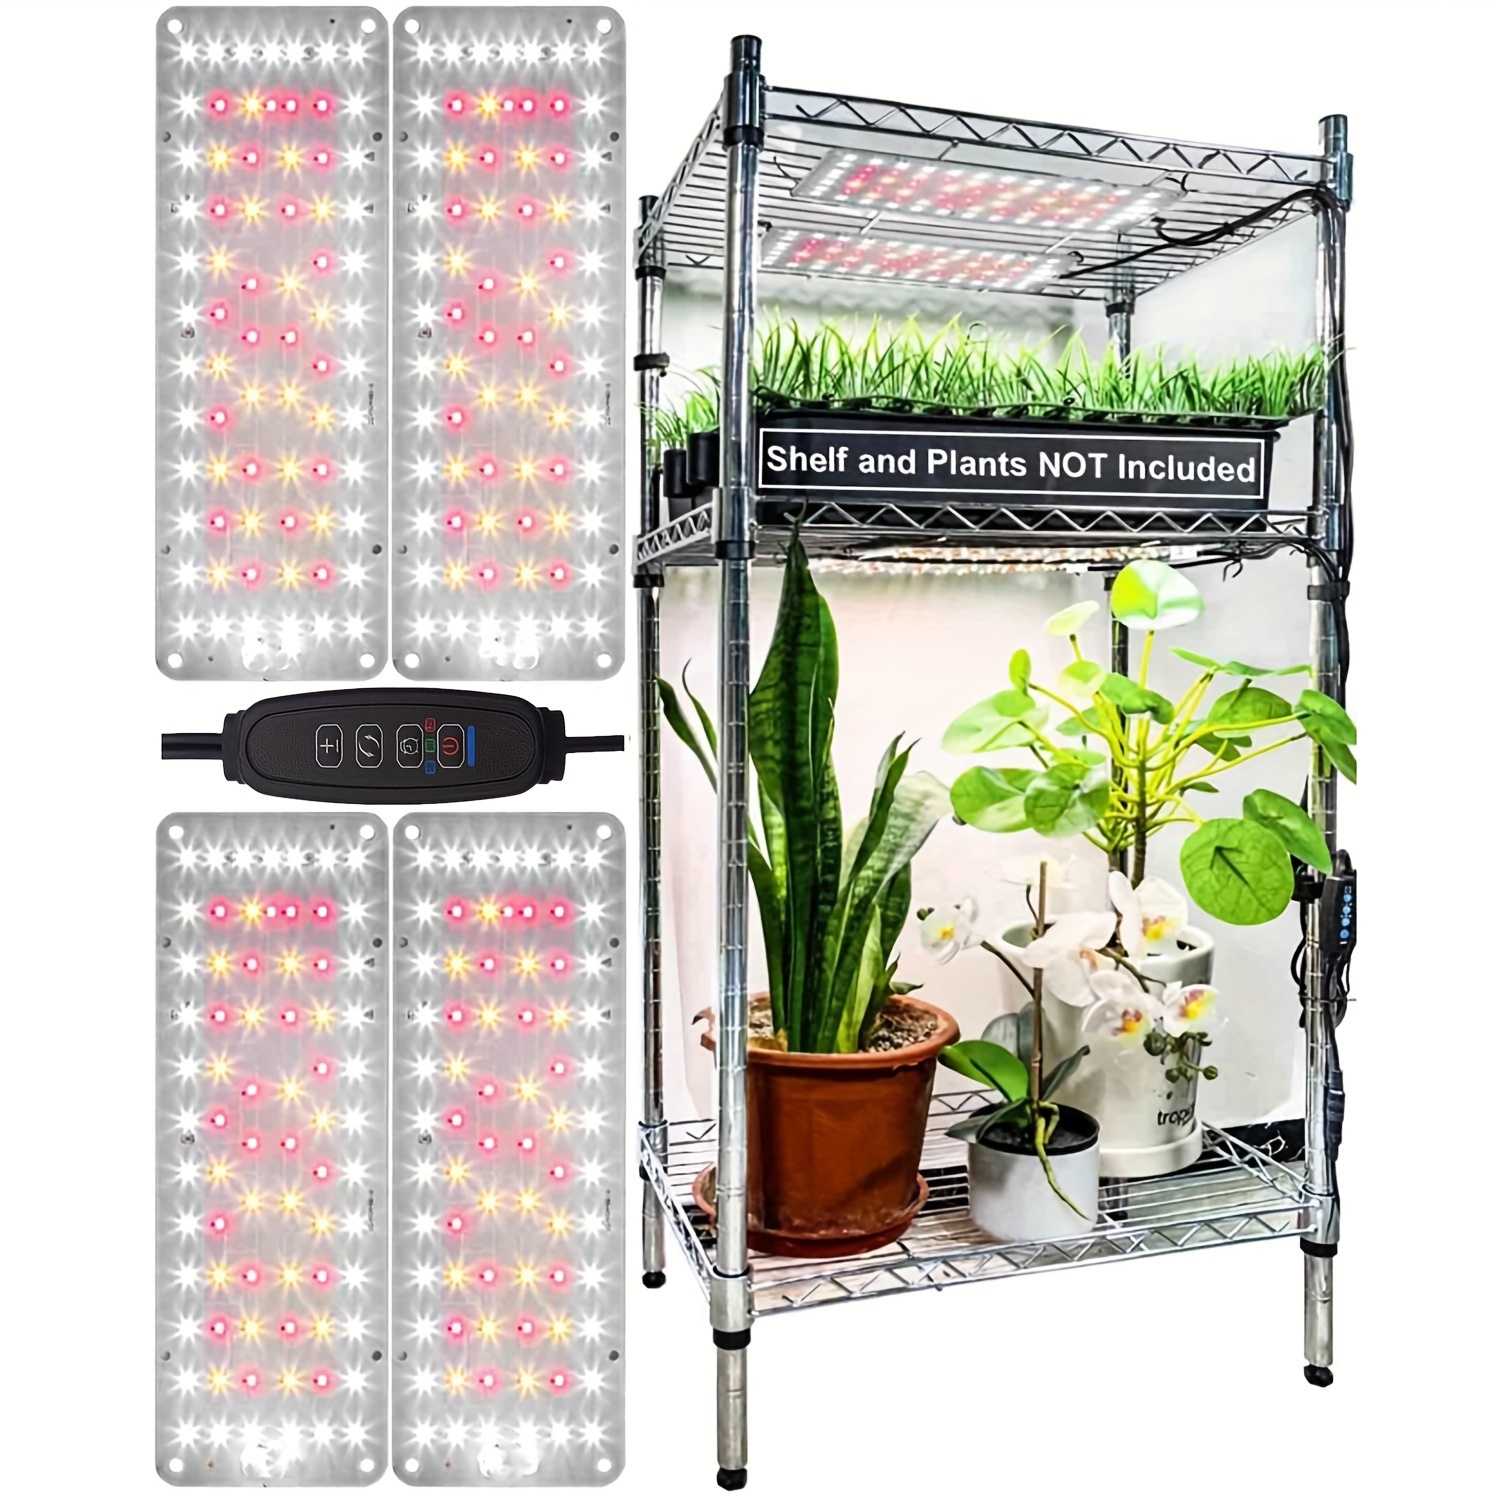 2 3 4pcs grow light full spectrum 50w 500w equiv led grow lights for indoor plants 6000k 3 spectrum modes dimmable timer durable aluminum ultra thin with 288 leds idea for seedlings greenhouse